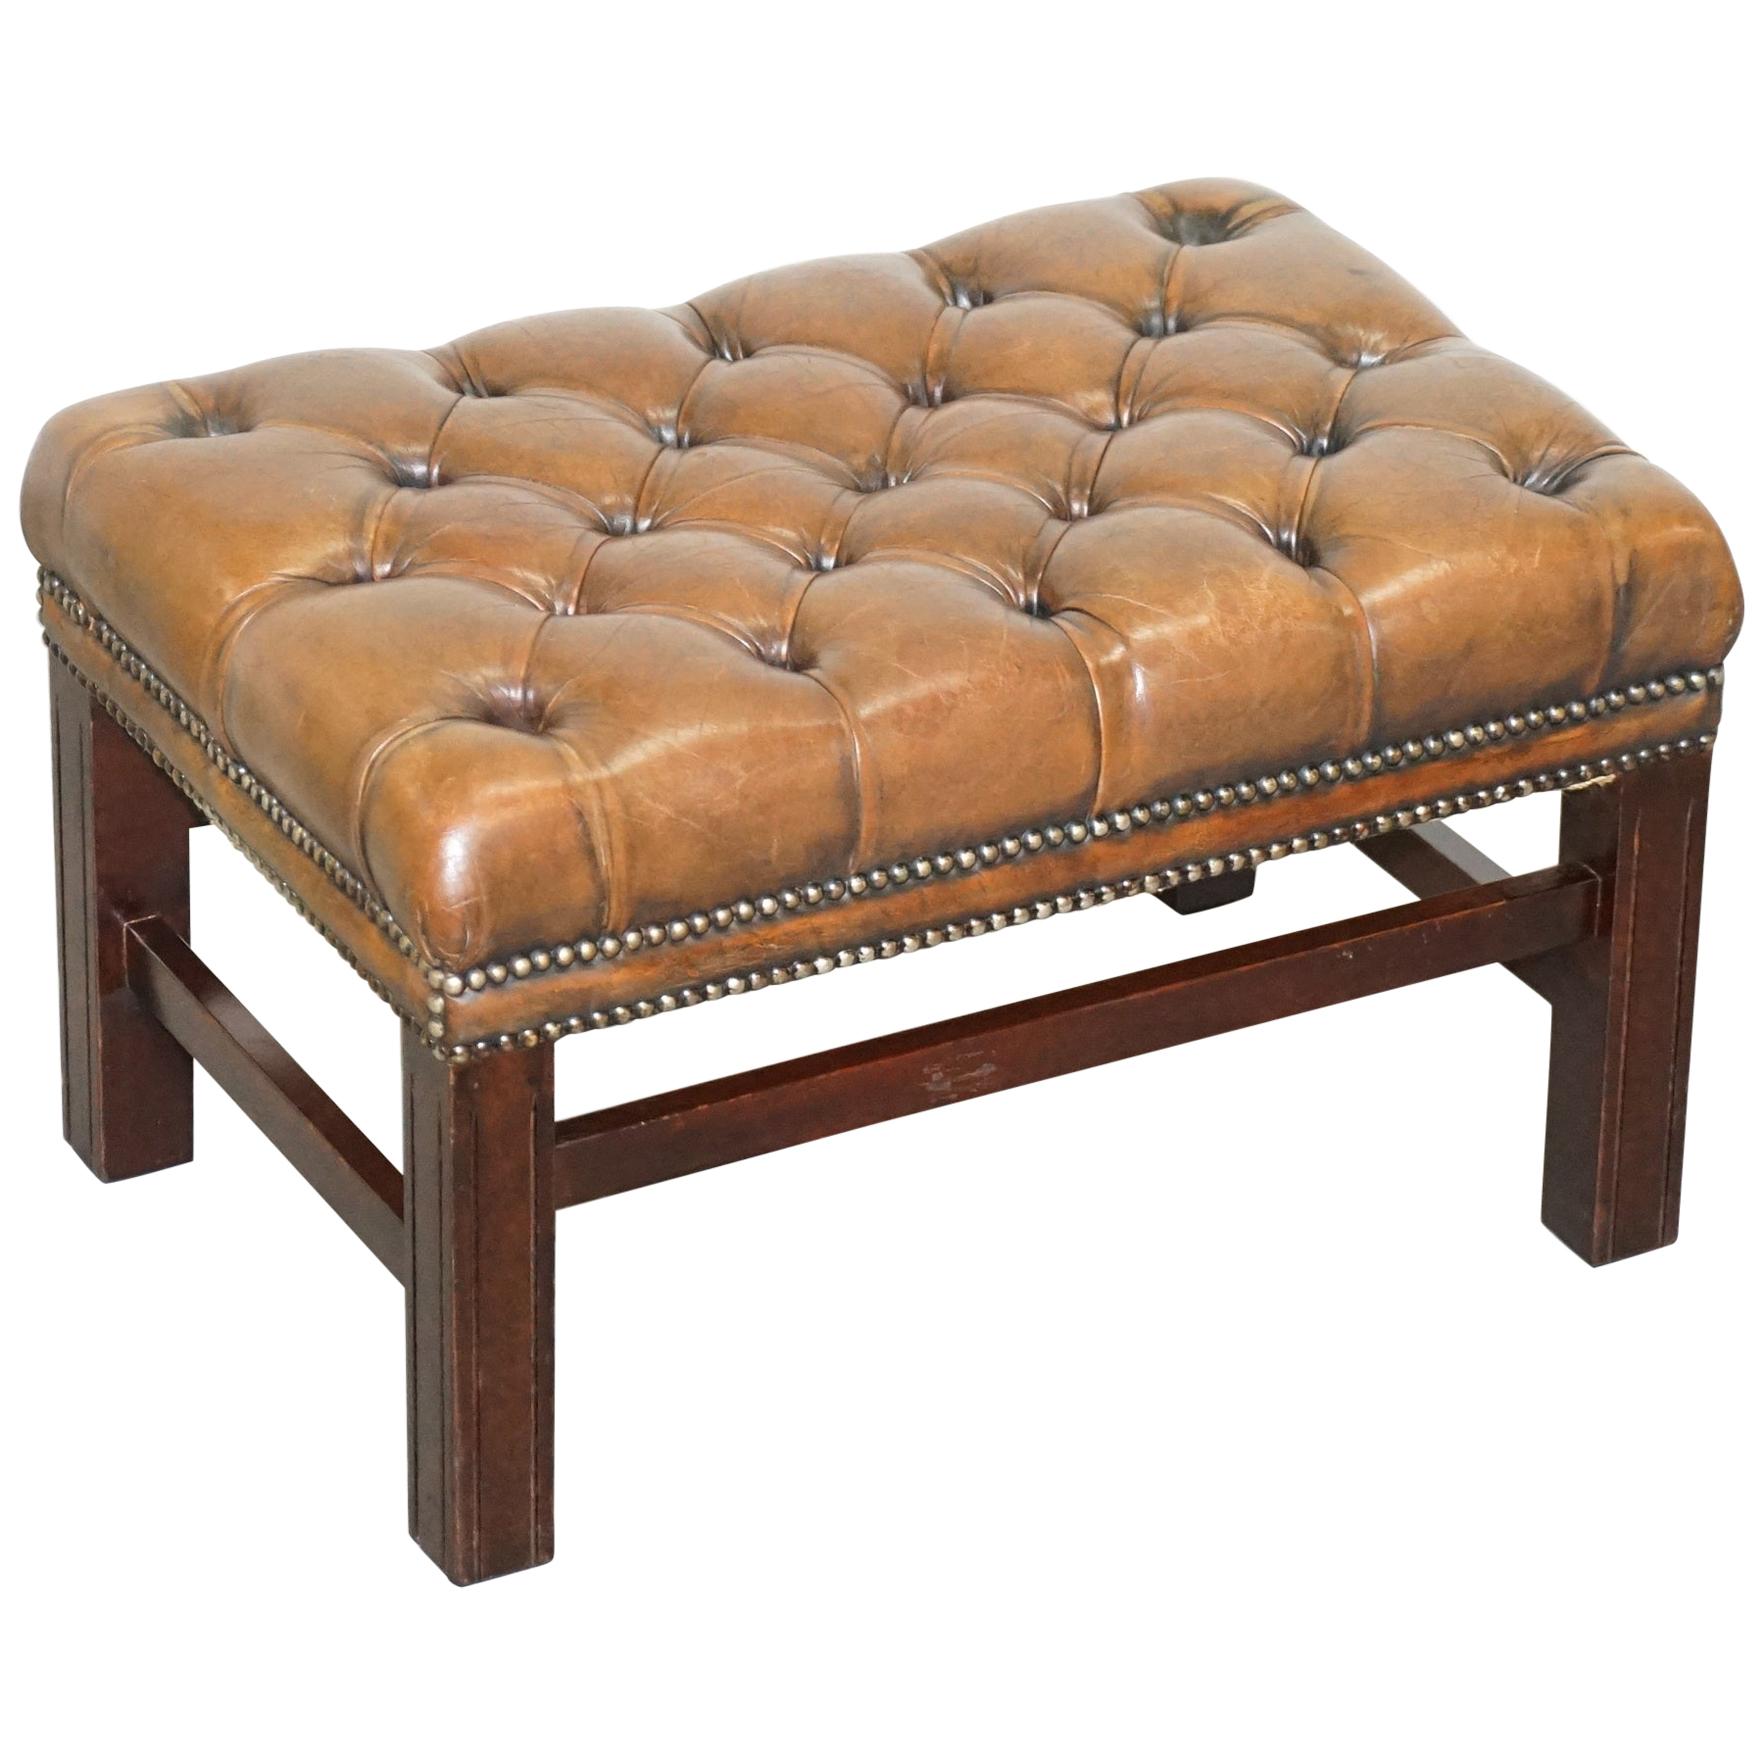 Lovely Vintage Hand Dyed Brown Leather Large Chesterfield Tufted Footstool